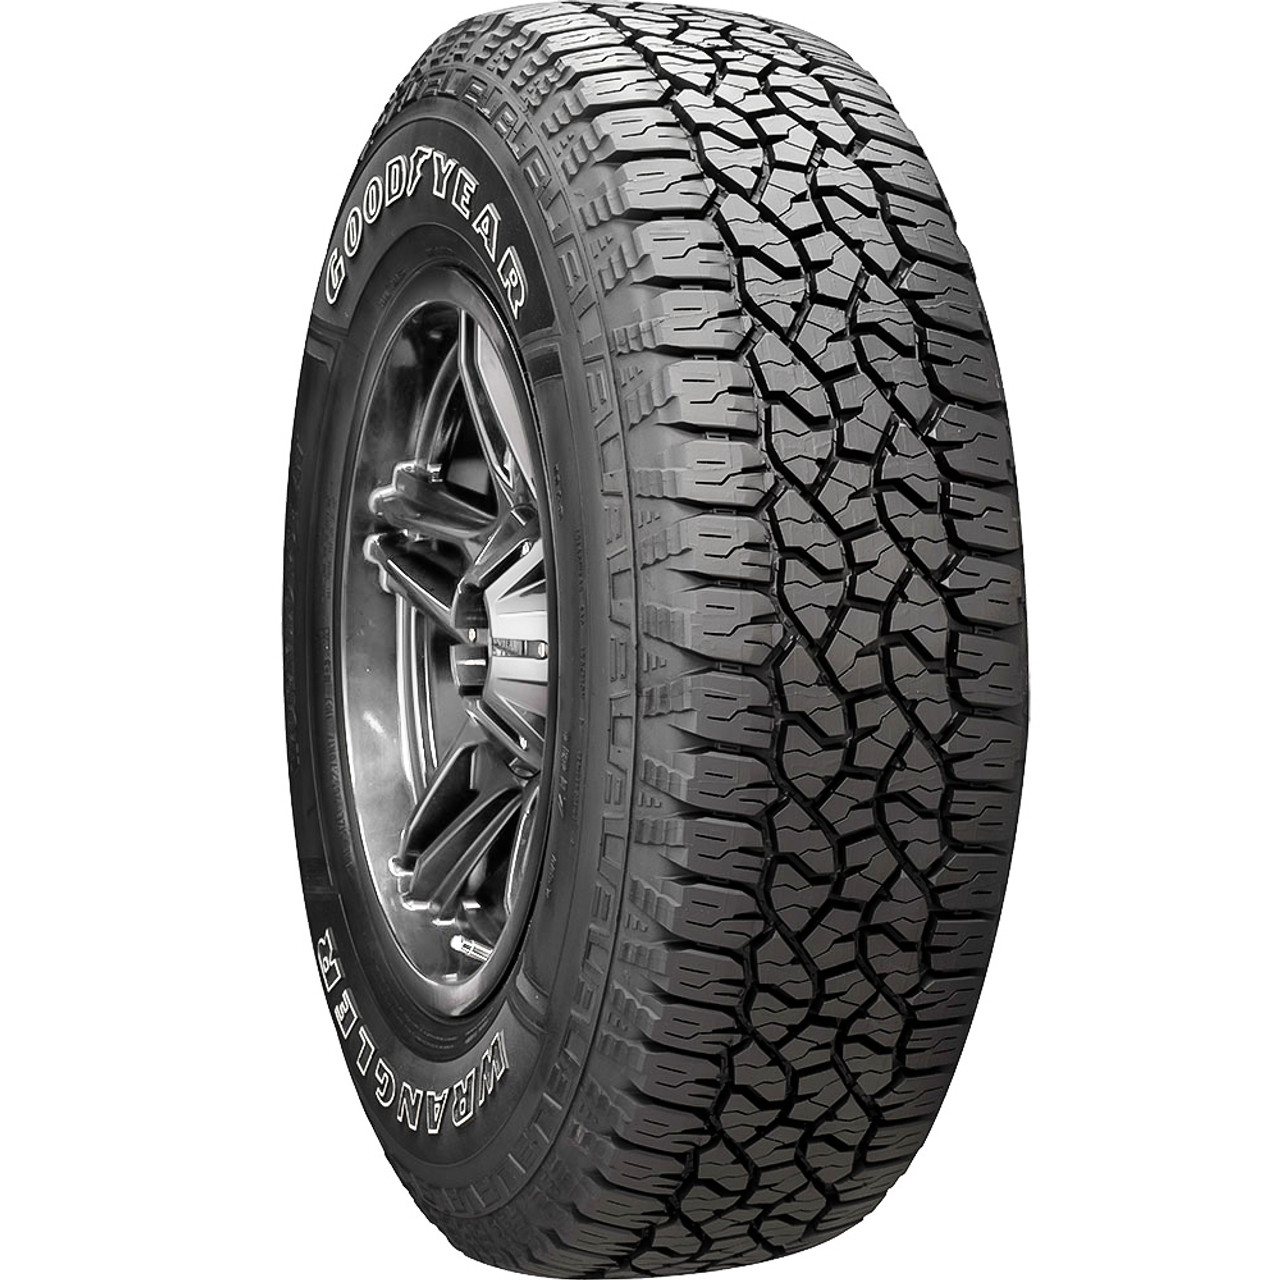 Goodyear Wrangler Workhorse AT 225/65R17 102T A/T All Terrain Tire